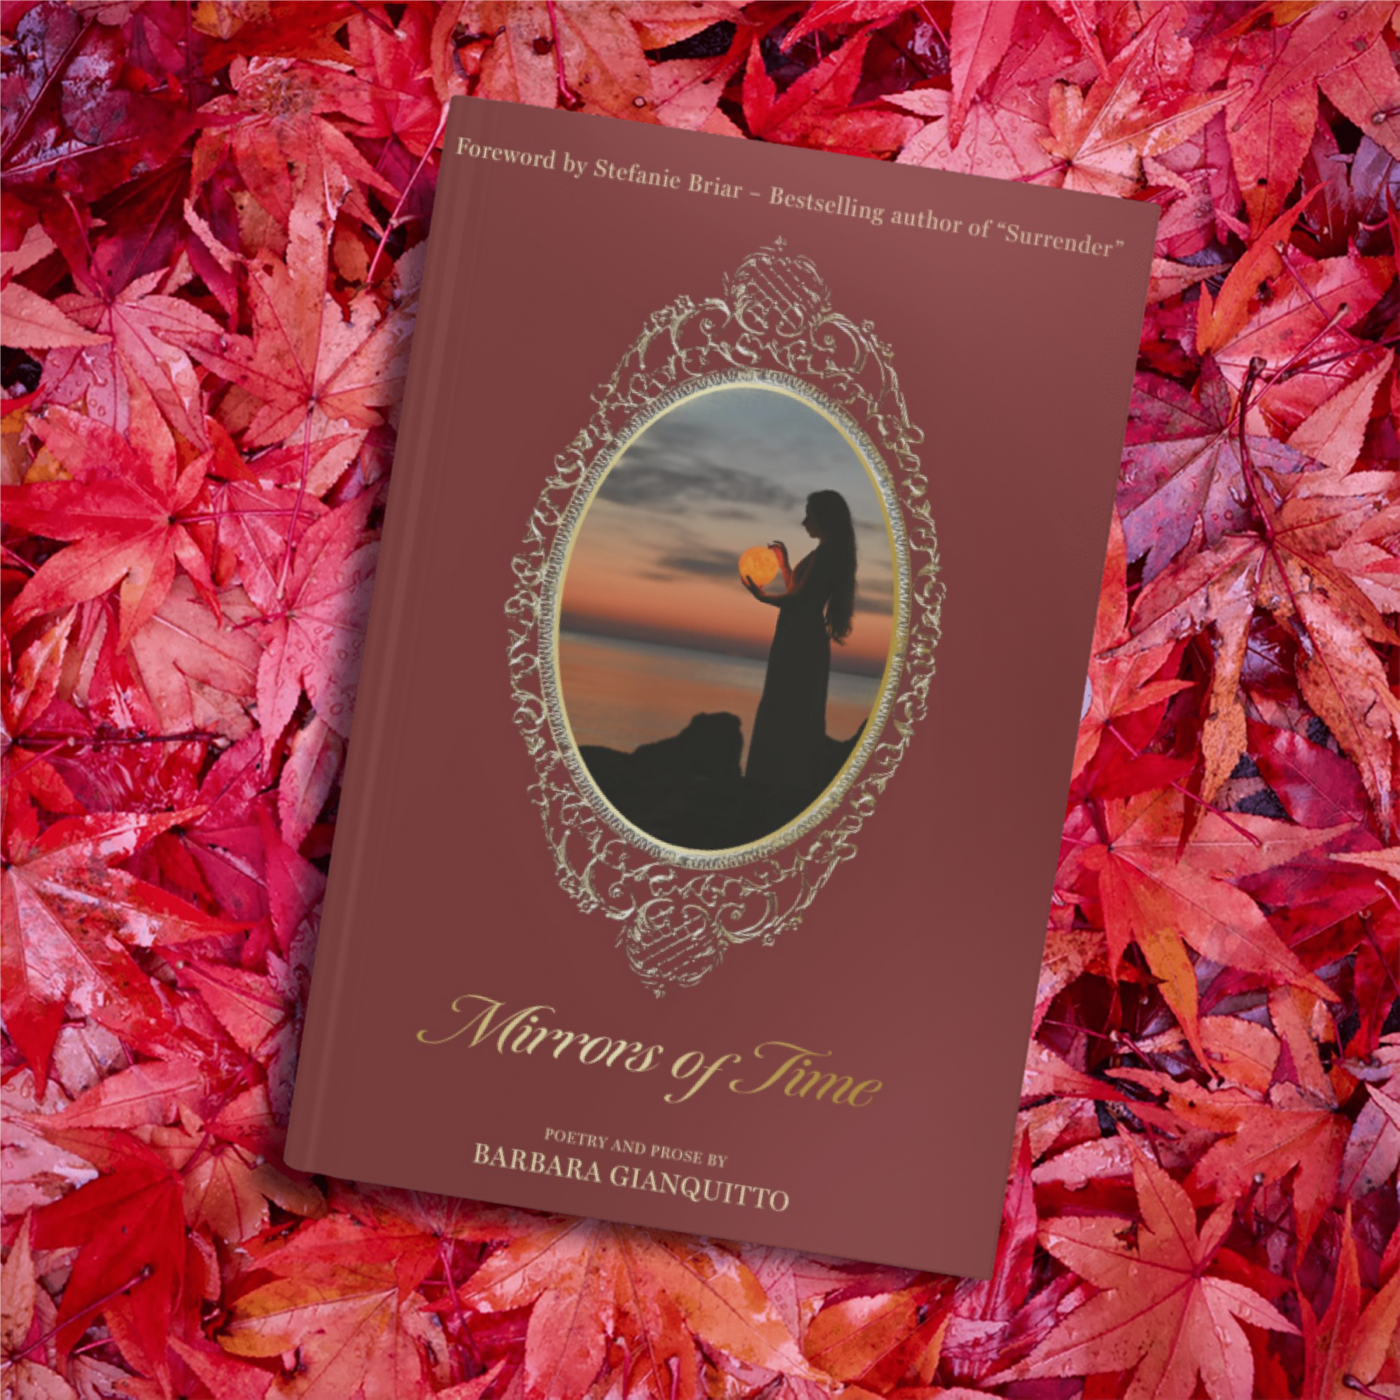 Mirrors of Time (Signed copy) - Poems about soulmate love across time and space